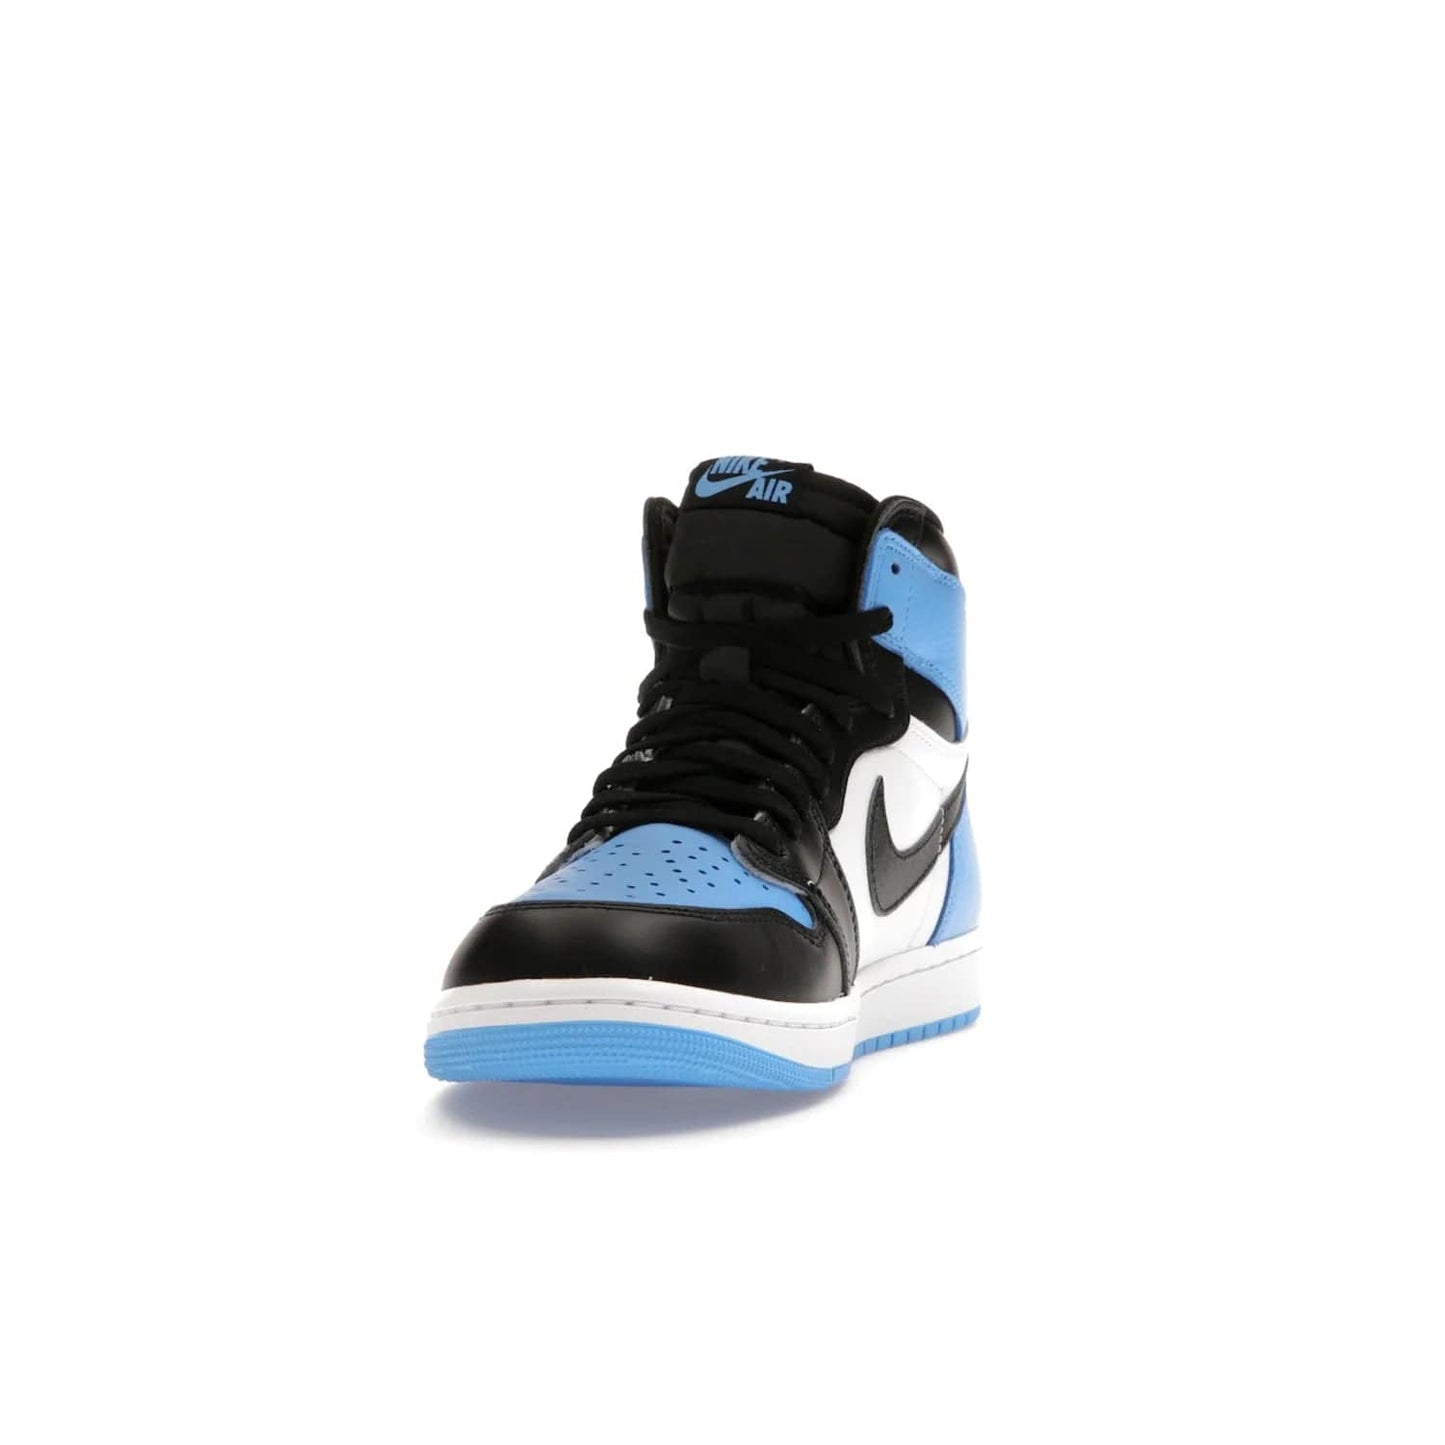 Jordan 1 Retro High OG UNC Toe - Image 12 - Only at www.BallersClubKickz.com - Jordan 1 High OG UNC Toe is a fashionable, high-quality sneaker featuring University Blue, Black White and White. Releasing July 22, 2023, it's the perfect pick up for sneakerheads.